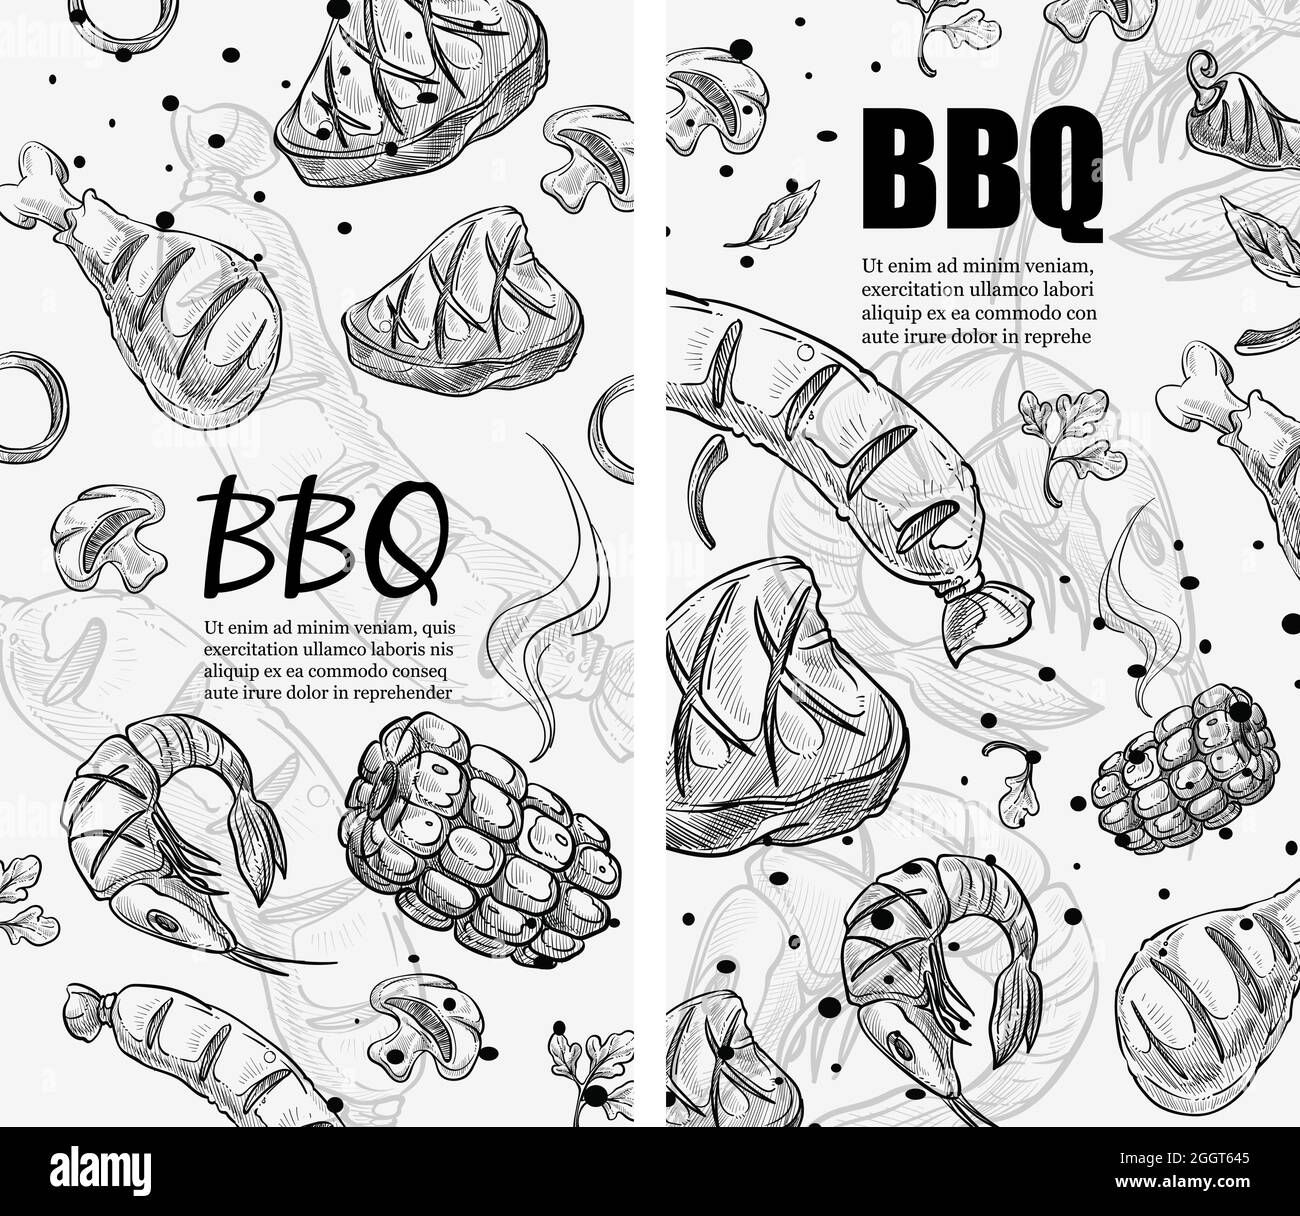 Bbq menu with grilled and roasted meat slices Stock Vector